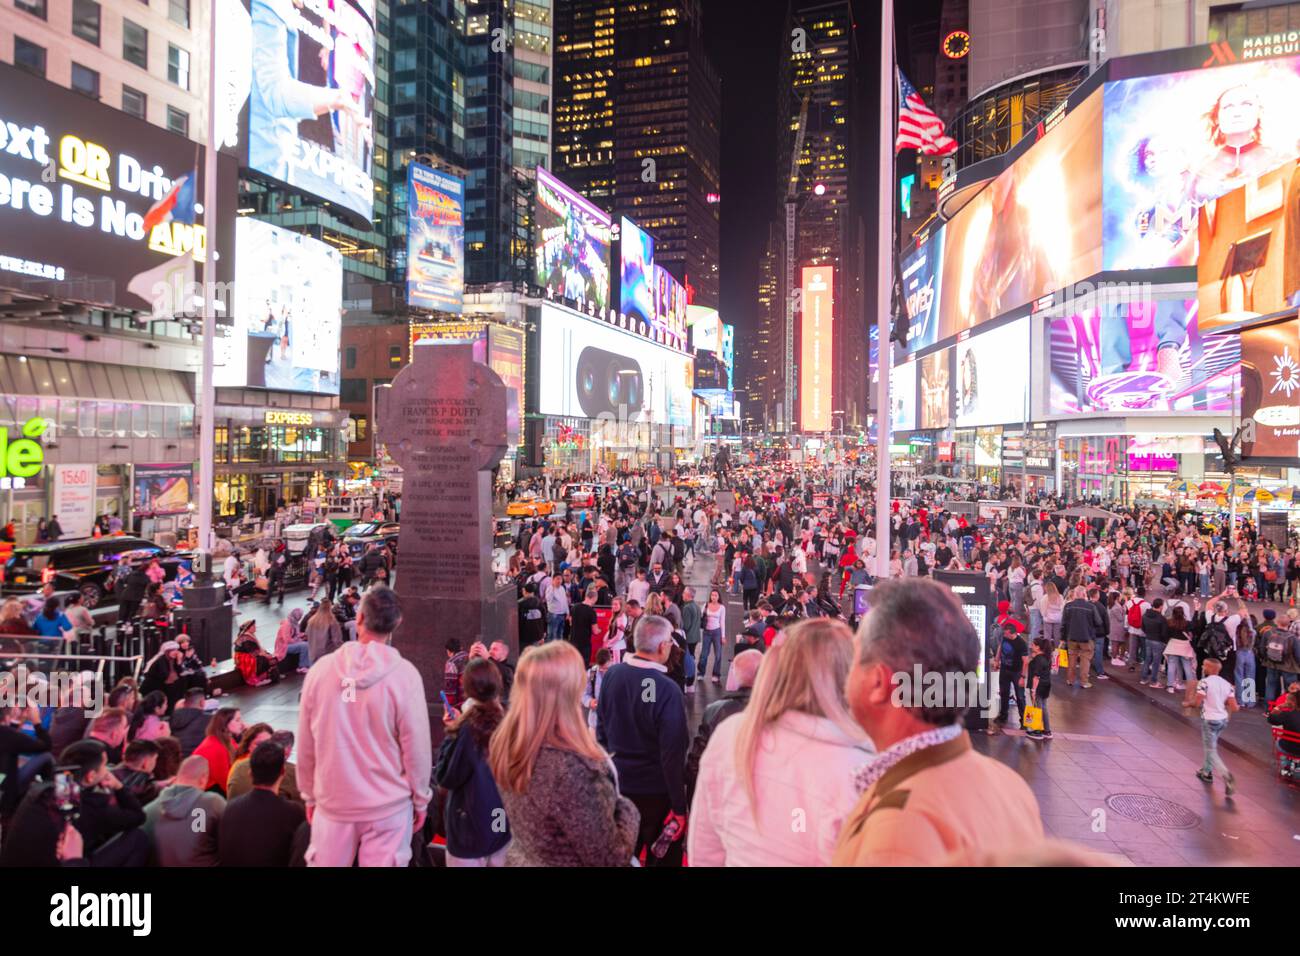 Times Square, New York City, United States of America. Stock Photo